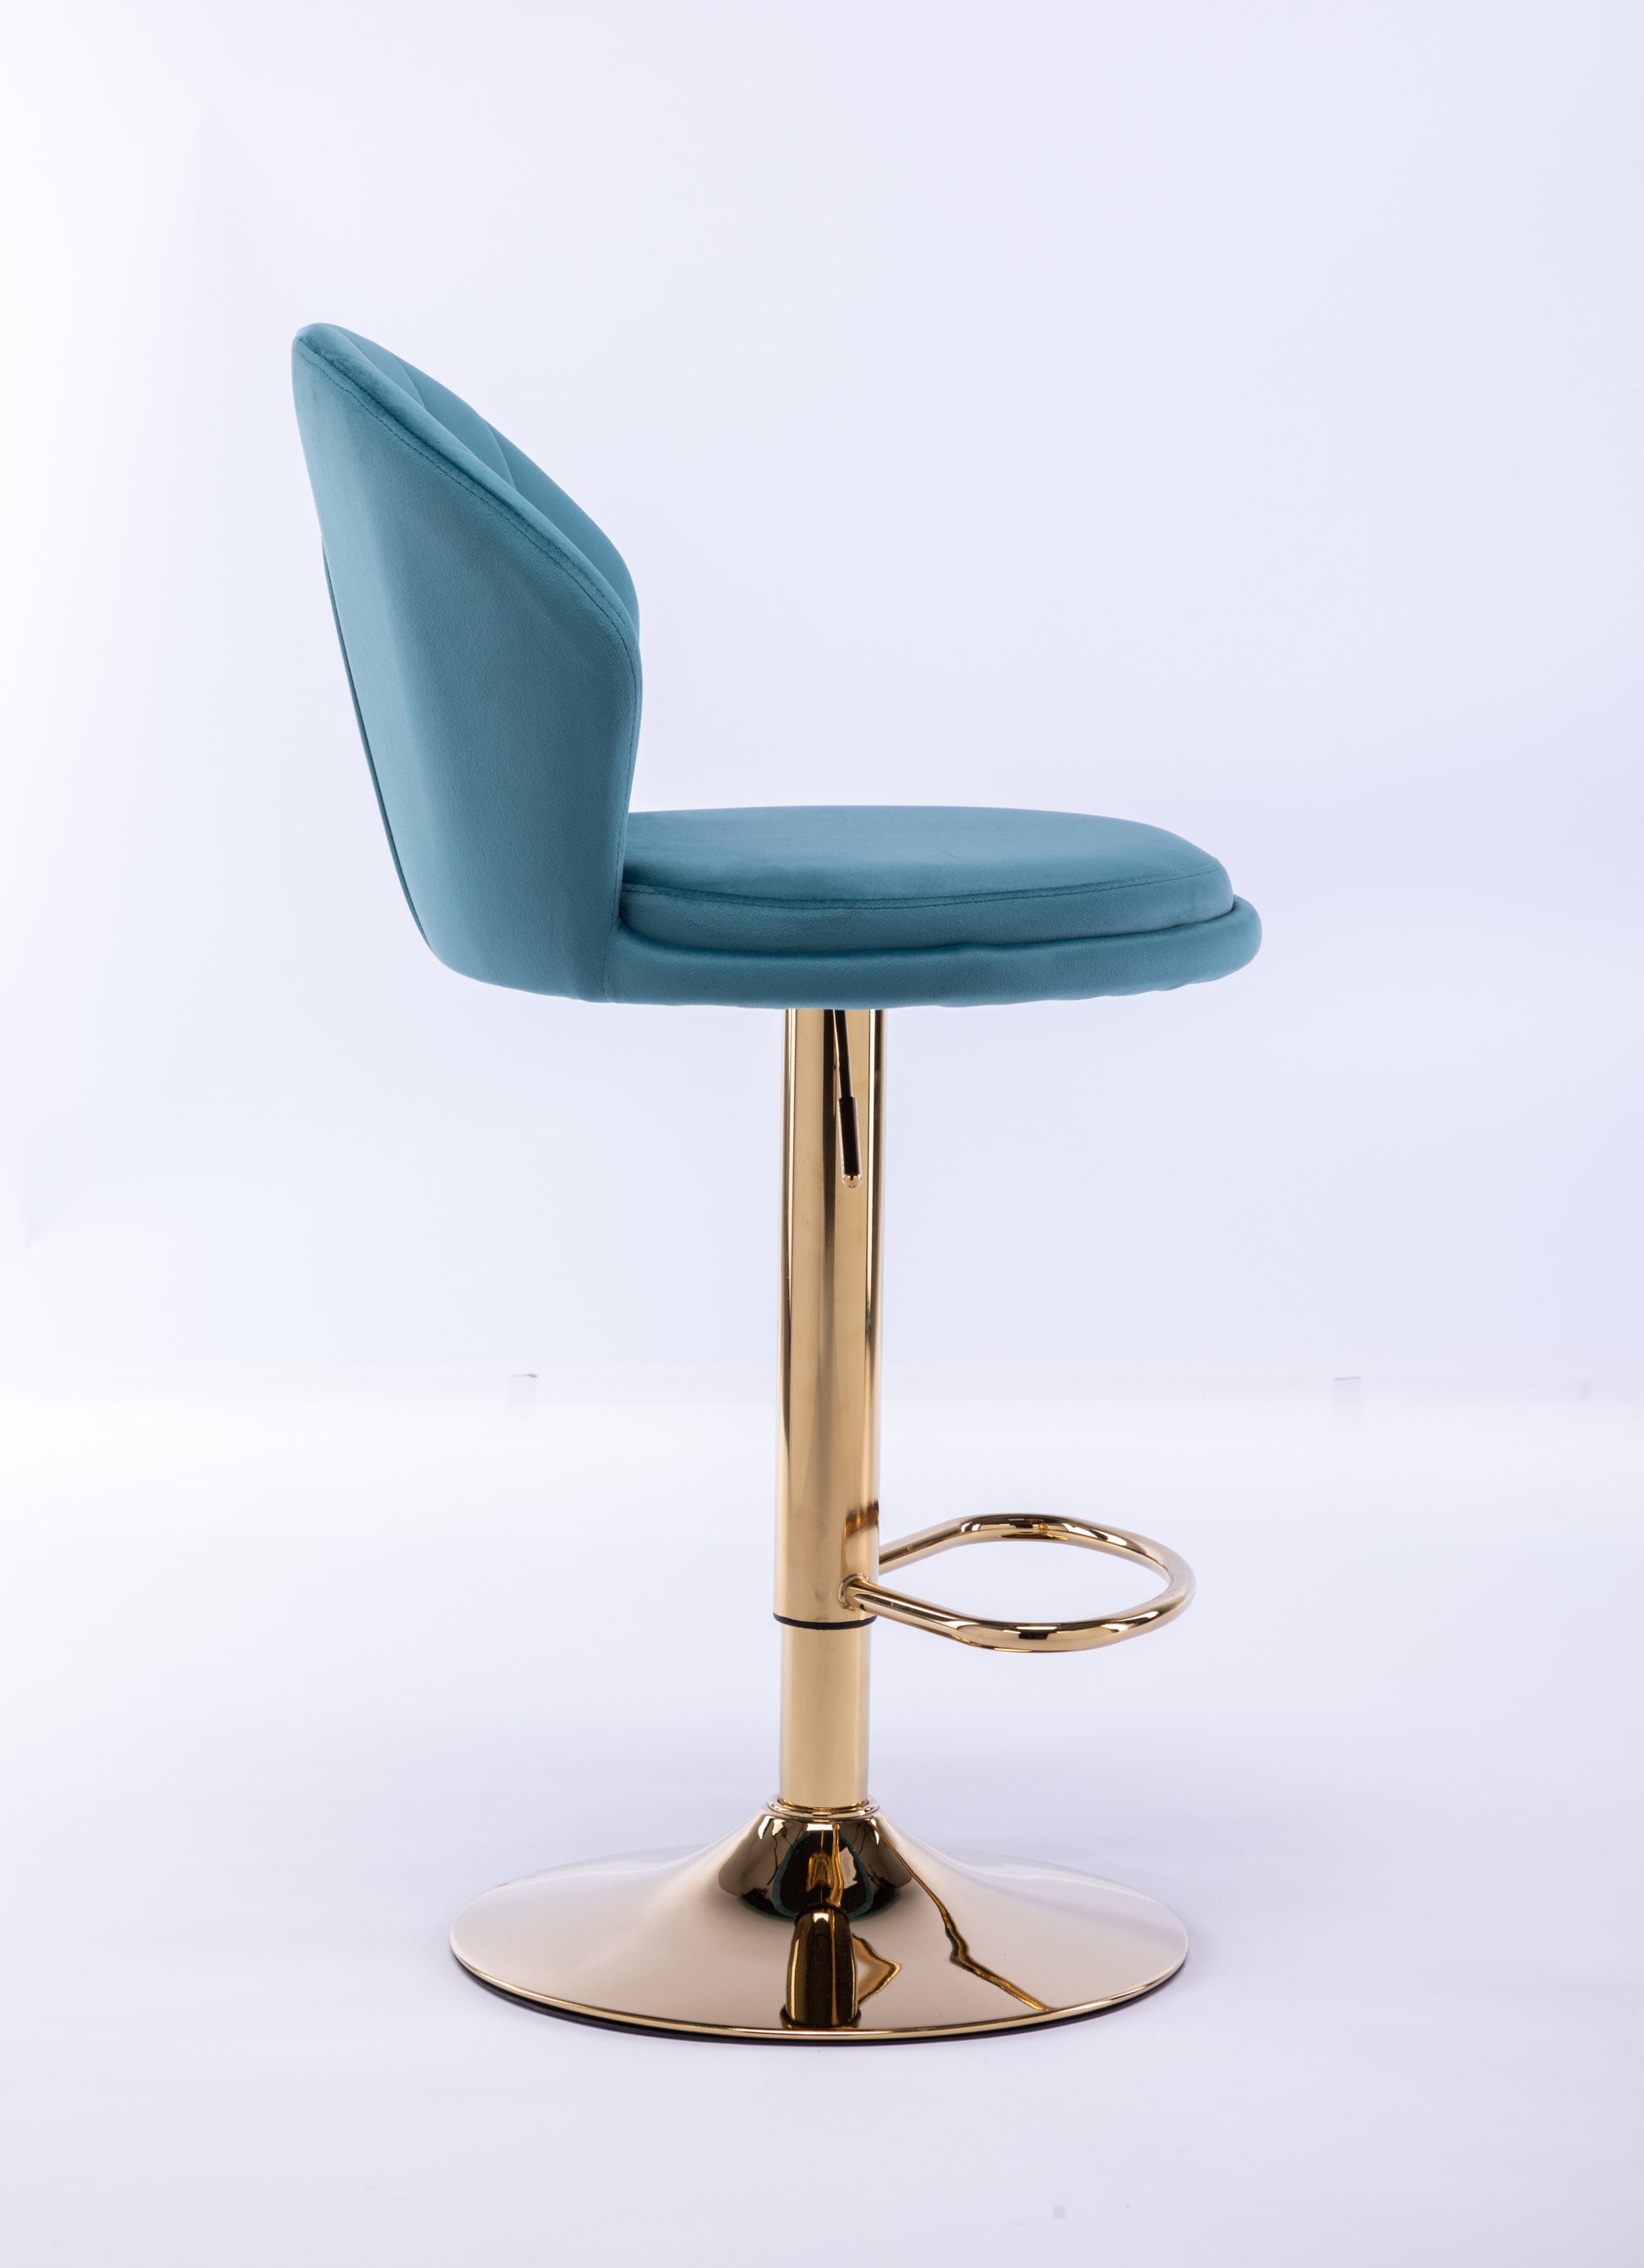 Set of 2  Bar Stools,with Chrome Footrest and Base Swivel Height Adjustable Mechanical Lifting Velvet + Golden Leg Simple Bar Stool-Baby Blue - Enova Luxe Home Store